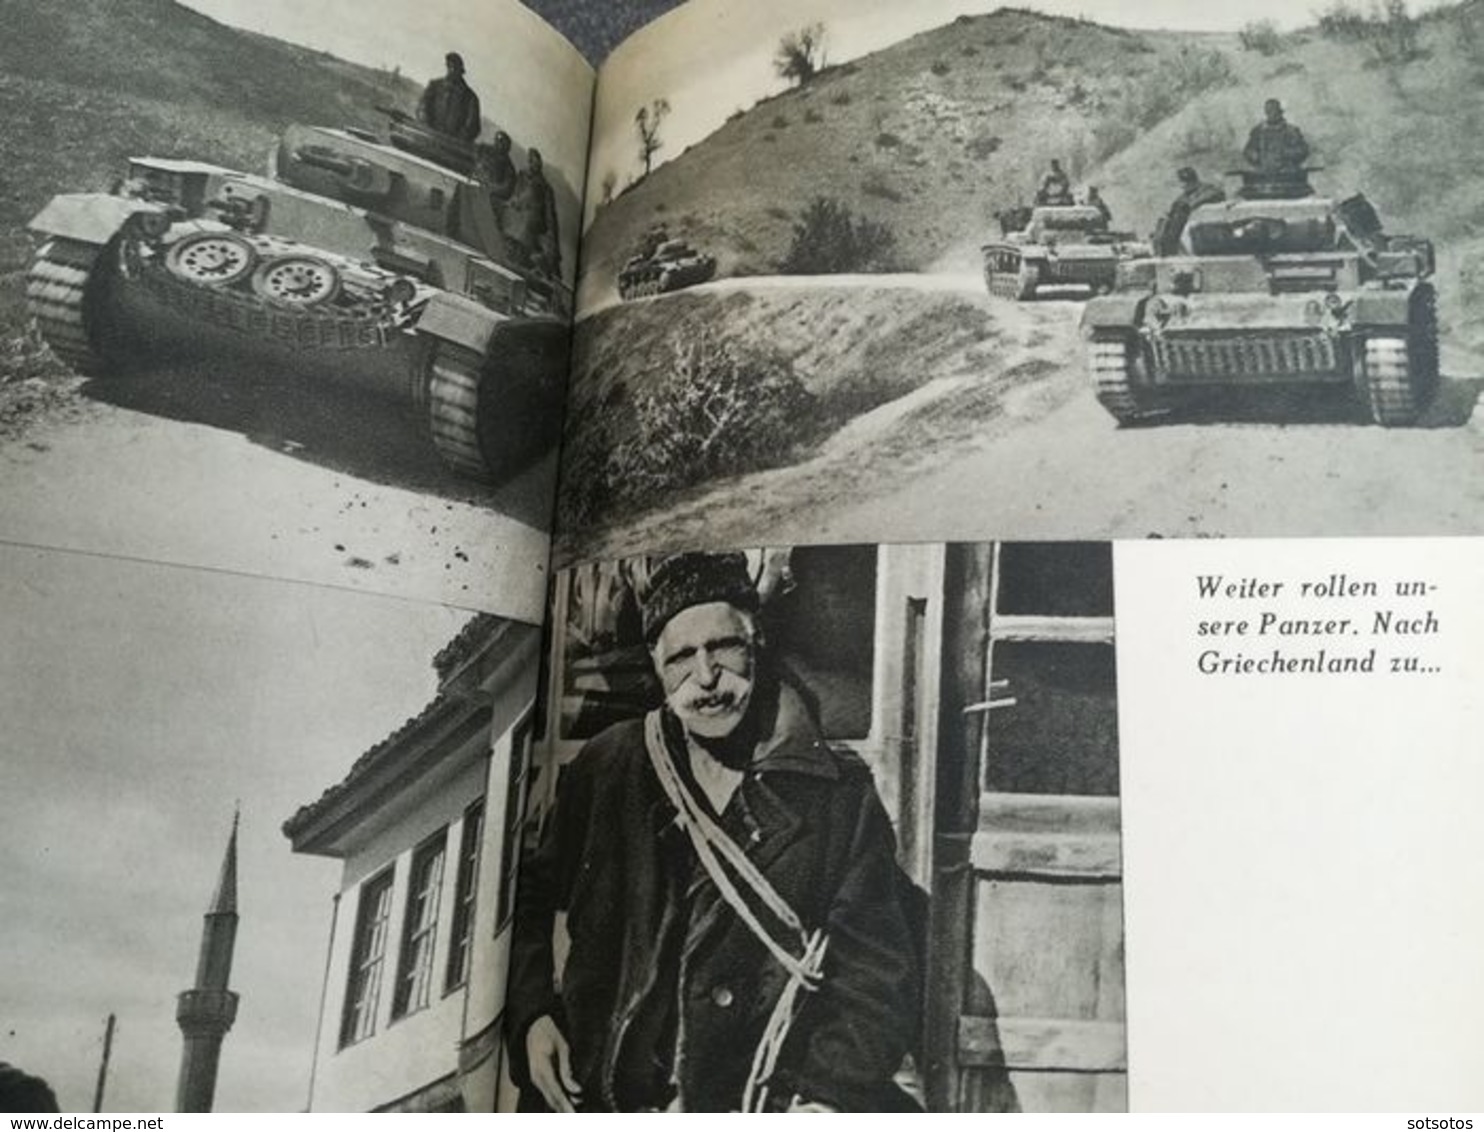 Germany – Uber der Panzern nach Griechenland  (Over the tanks to Greece) - 1942  Book, Greece southeast campaign Wehrmac